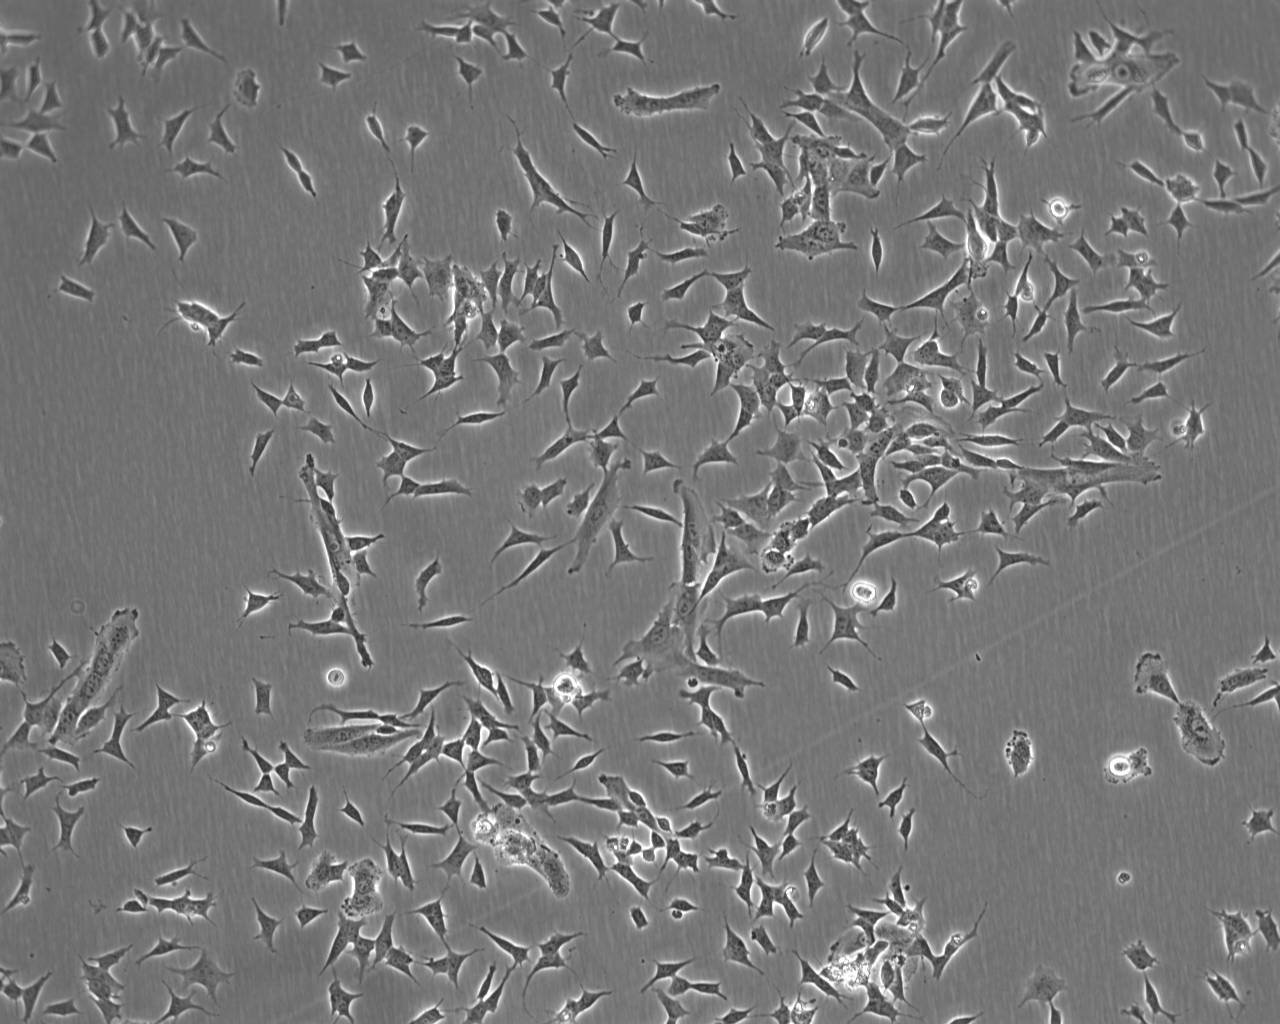 SW1463 epithelioid cells人结肠腺癌细胞系,SW1463 epithelioid cells